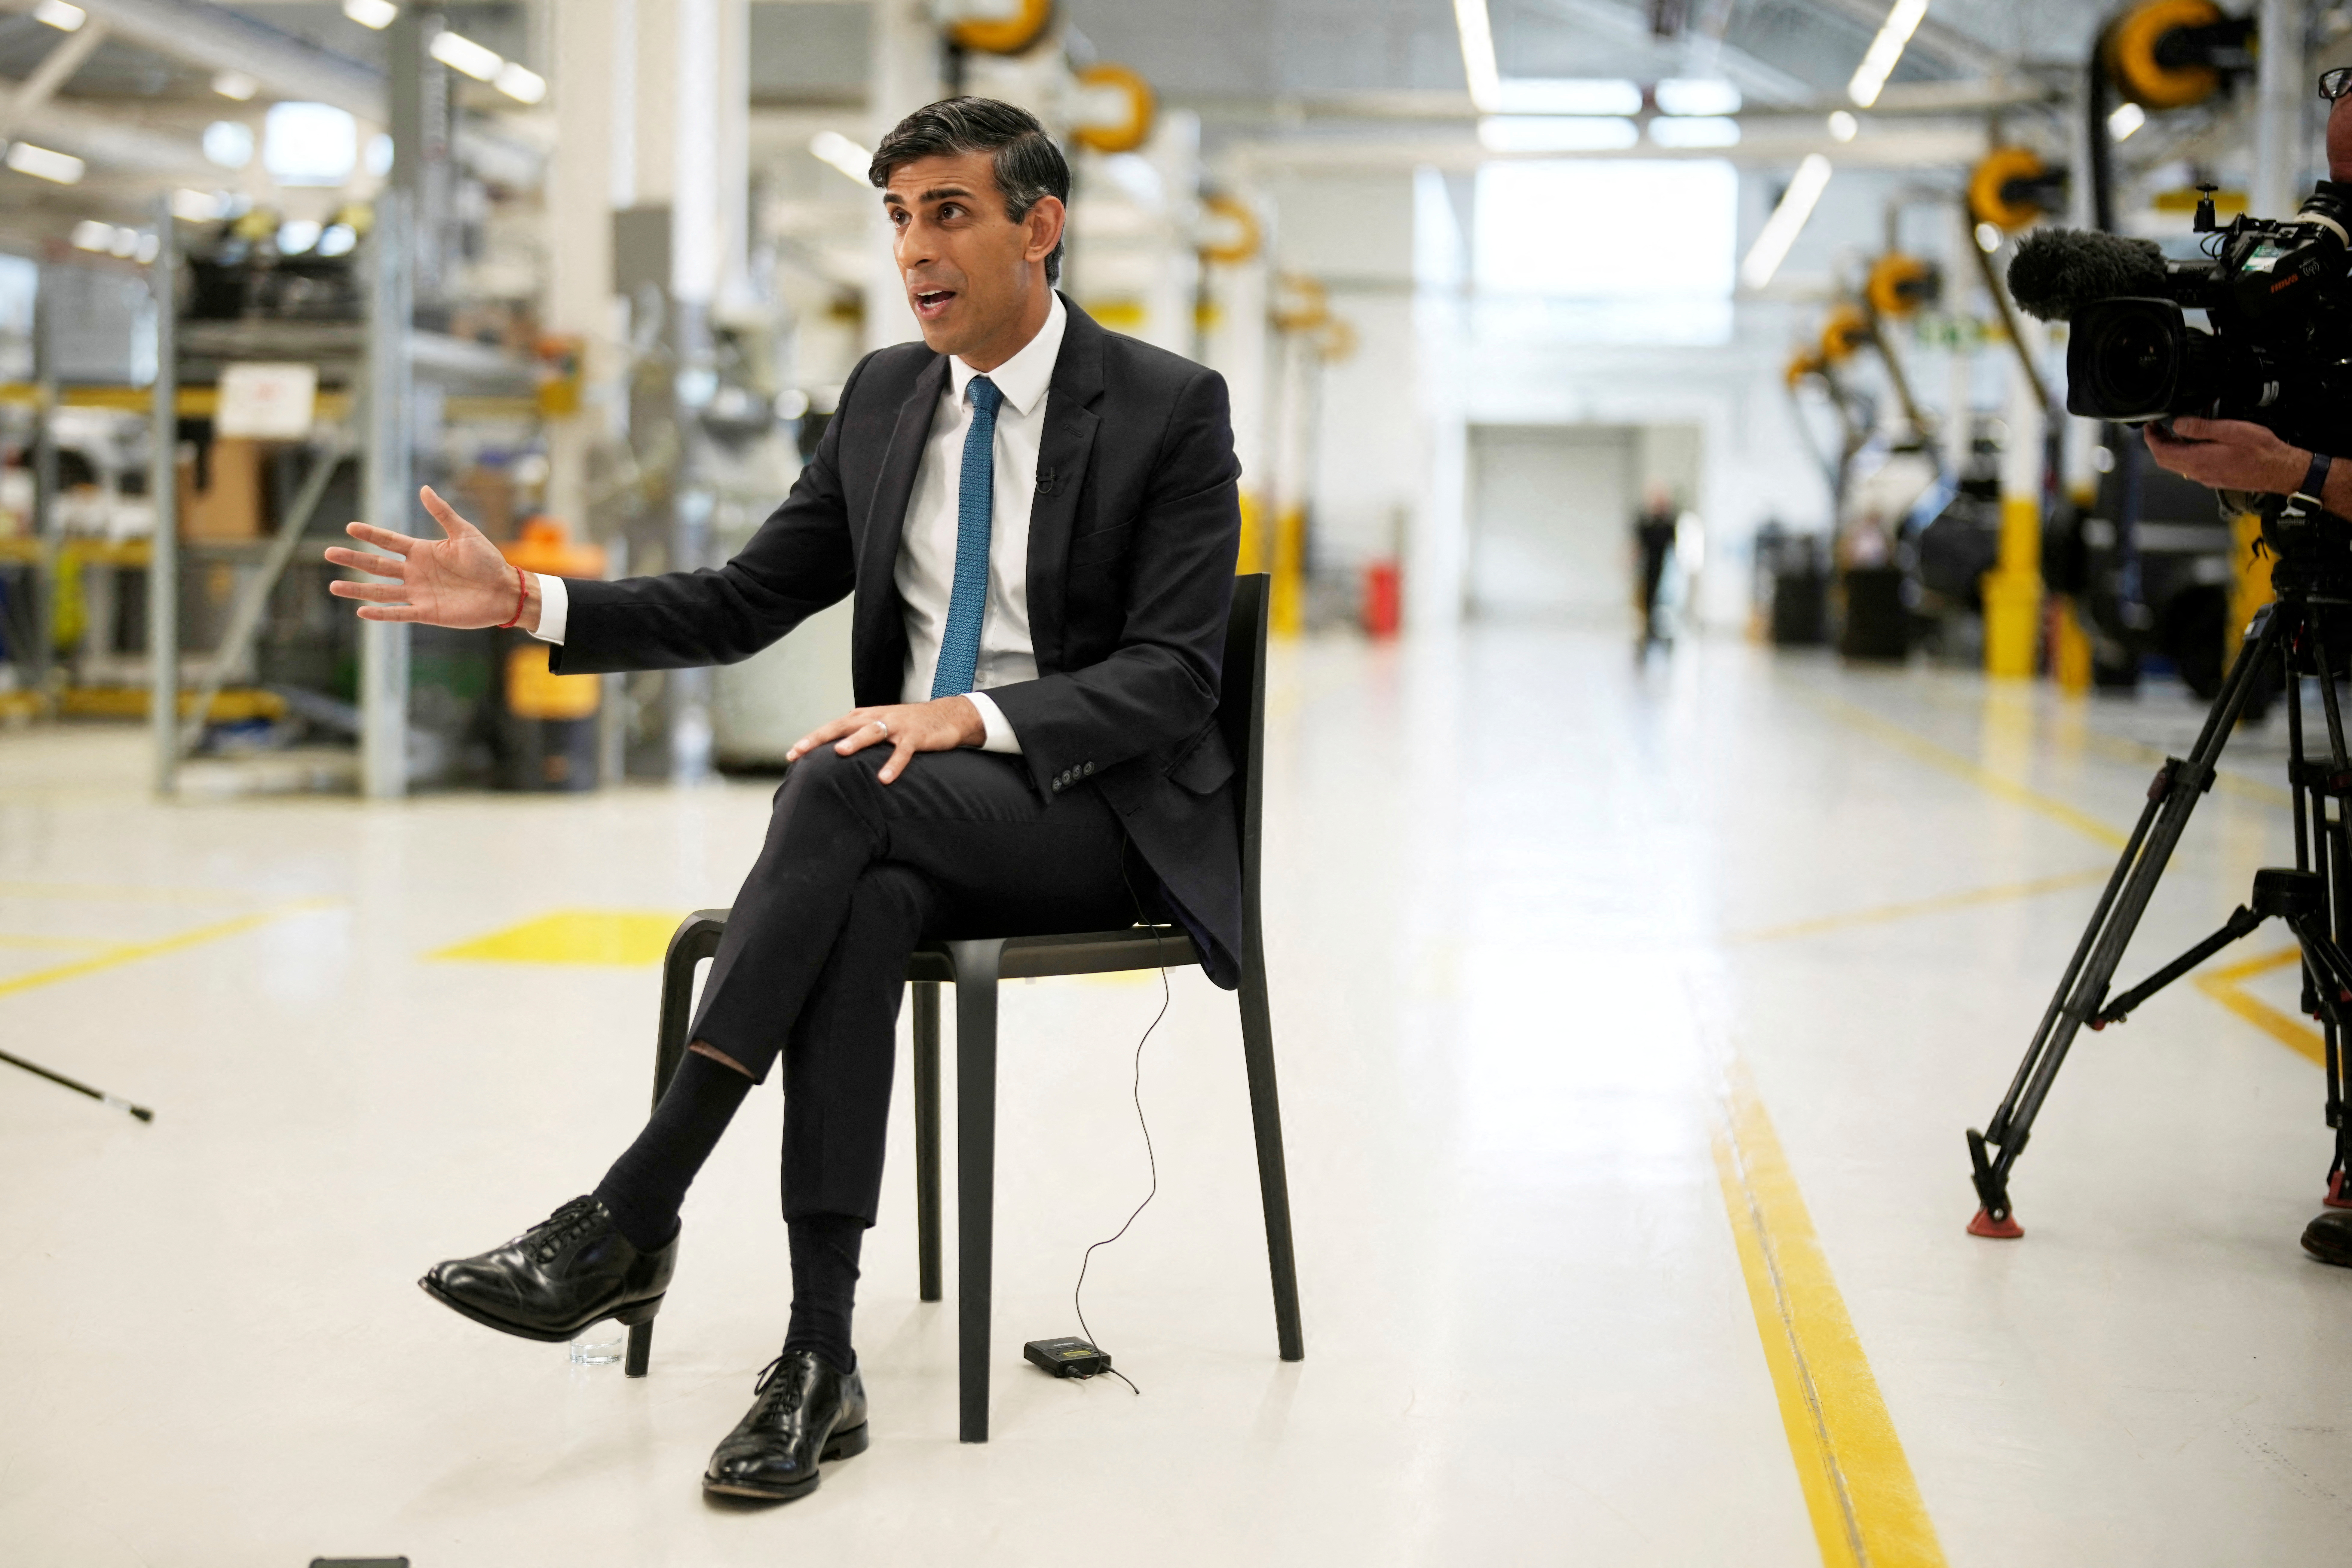 UK Prime Minister Rishi Sunak recently announced plans to delay the ban on sales of new petrol and diesel cars until 2035 - but Citroen's CEO says the company is pressing on with its transition to electric vehicles. /Christopher Furlong/Reuters